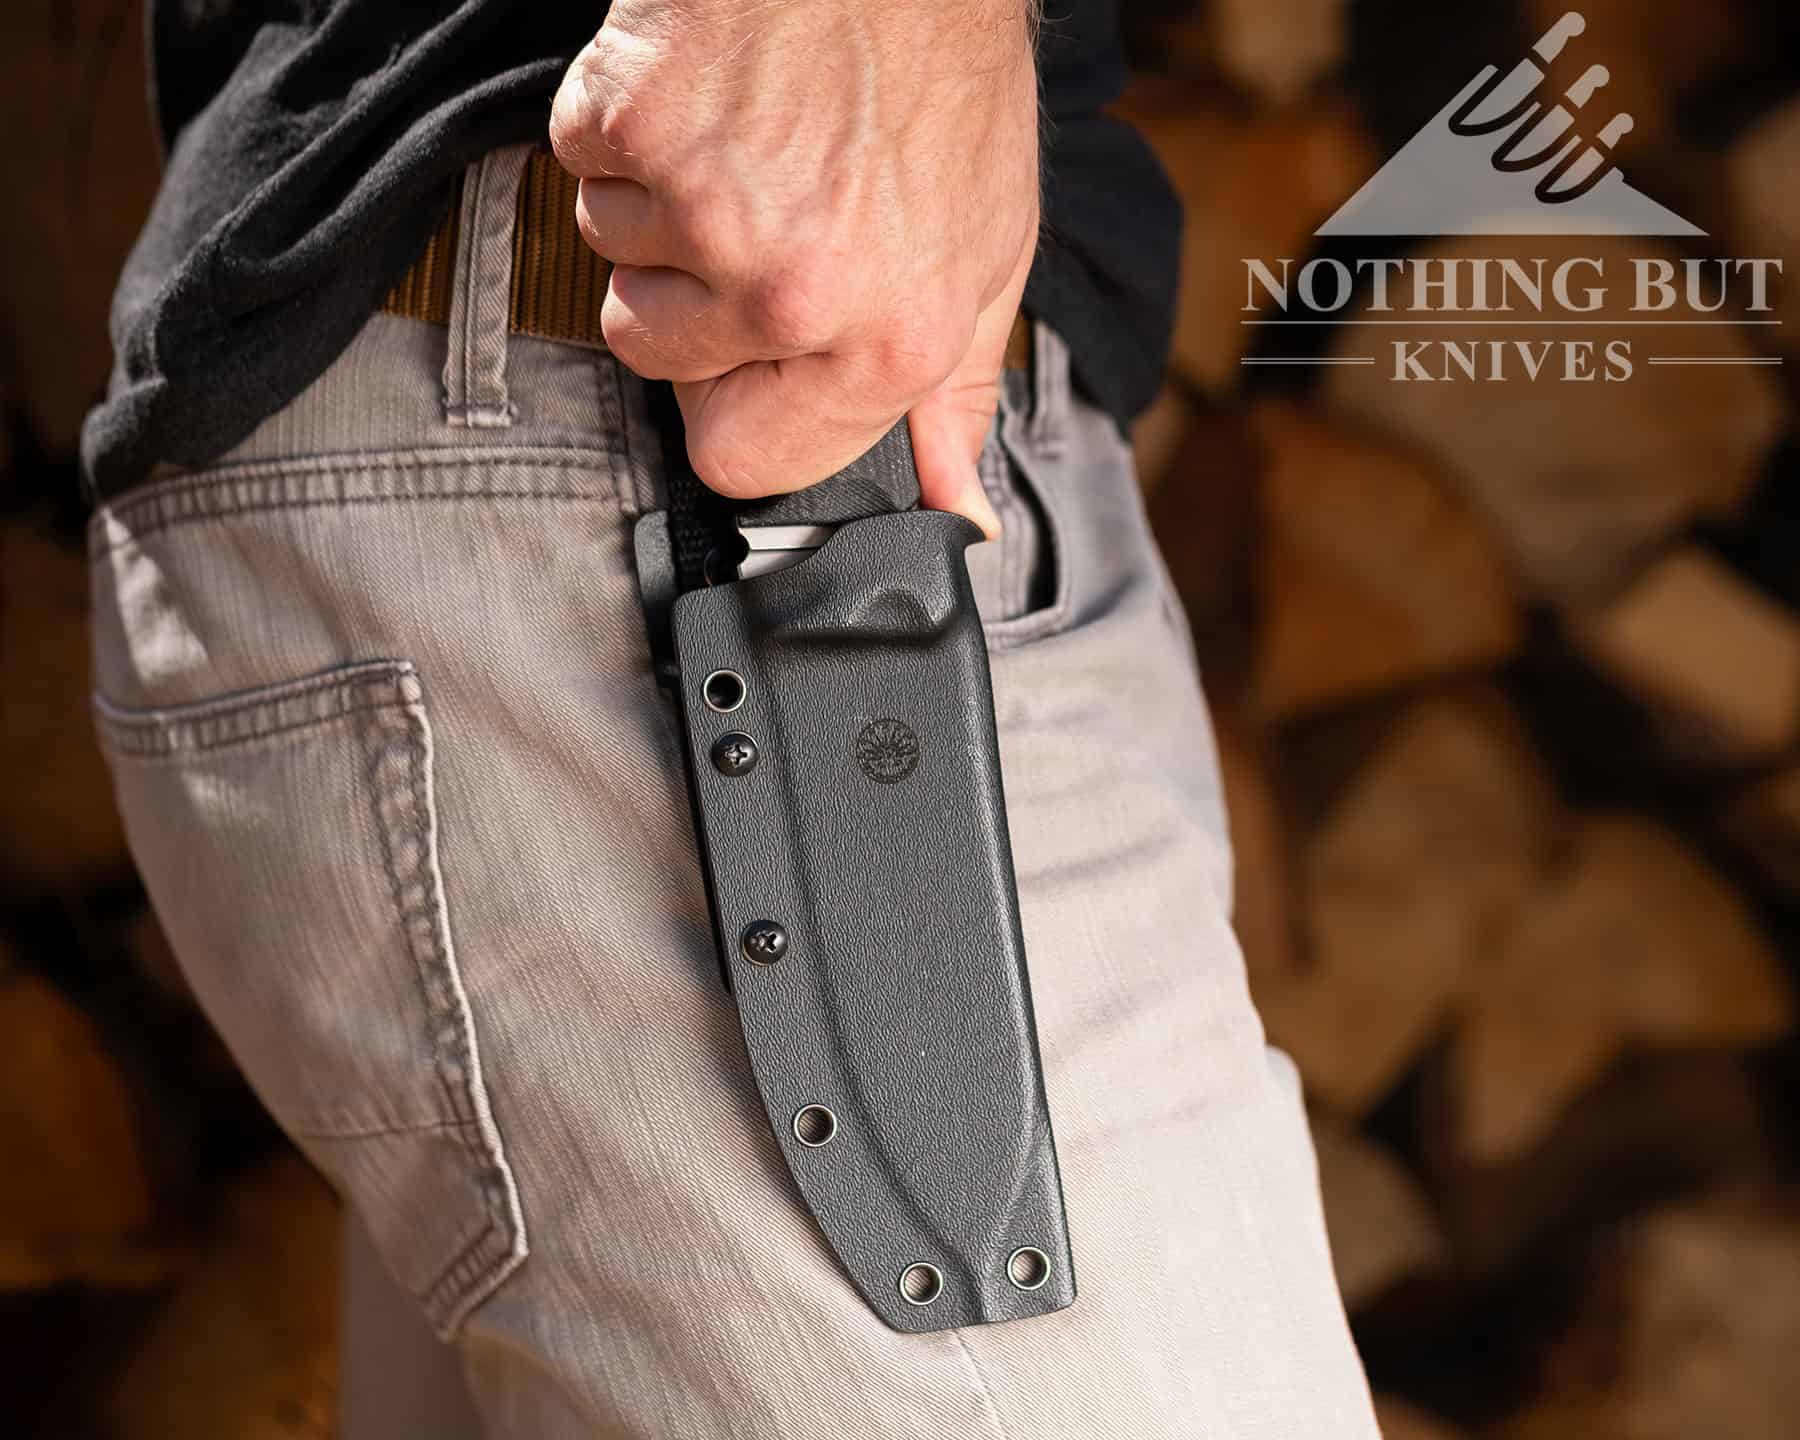 The 2023 update of the Ridgeback features a flat grind option and a thumb ramp on the kydex sheath.